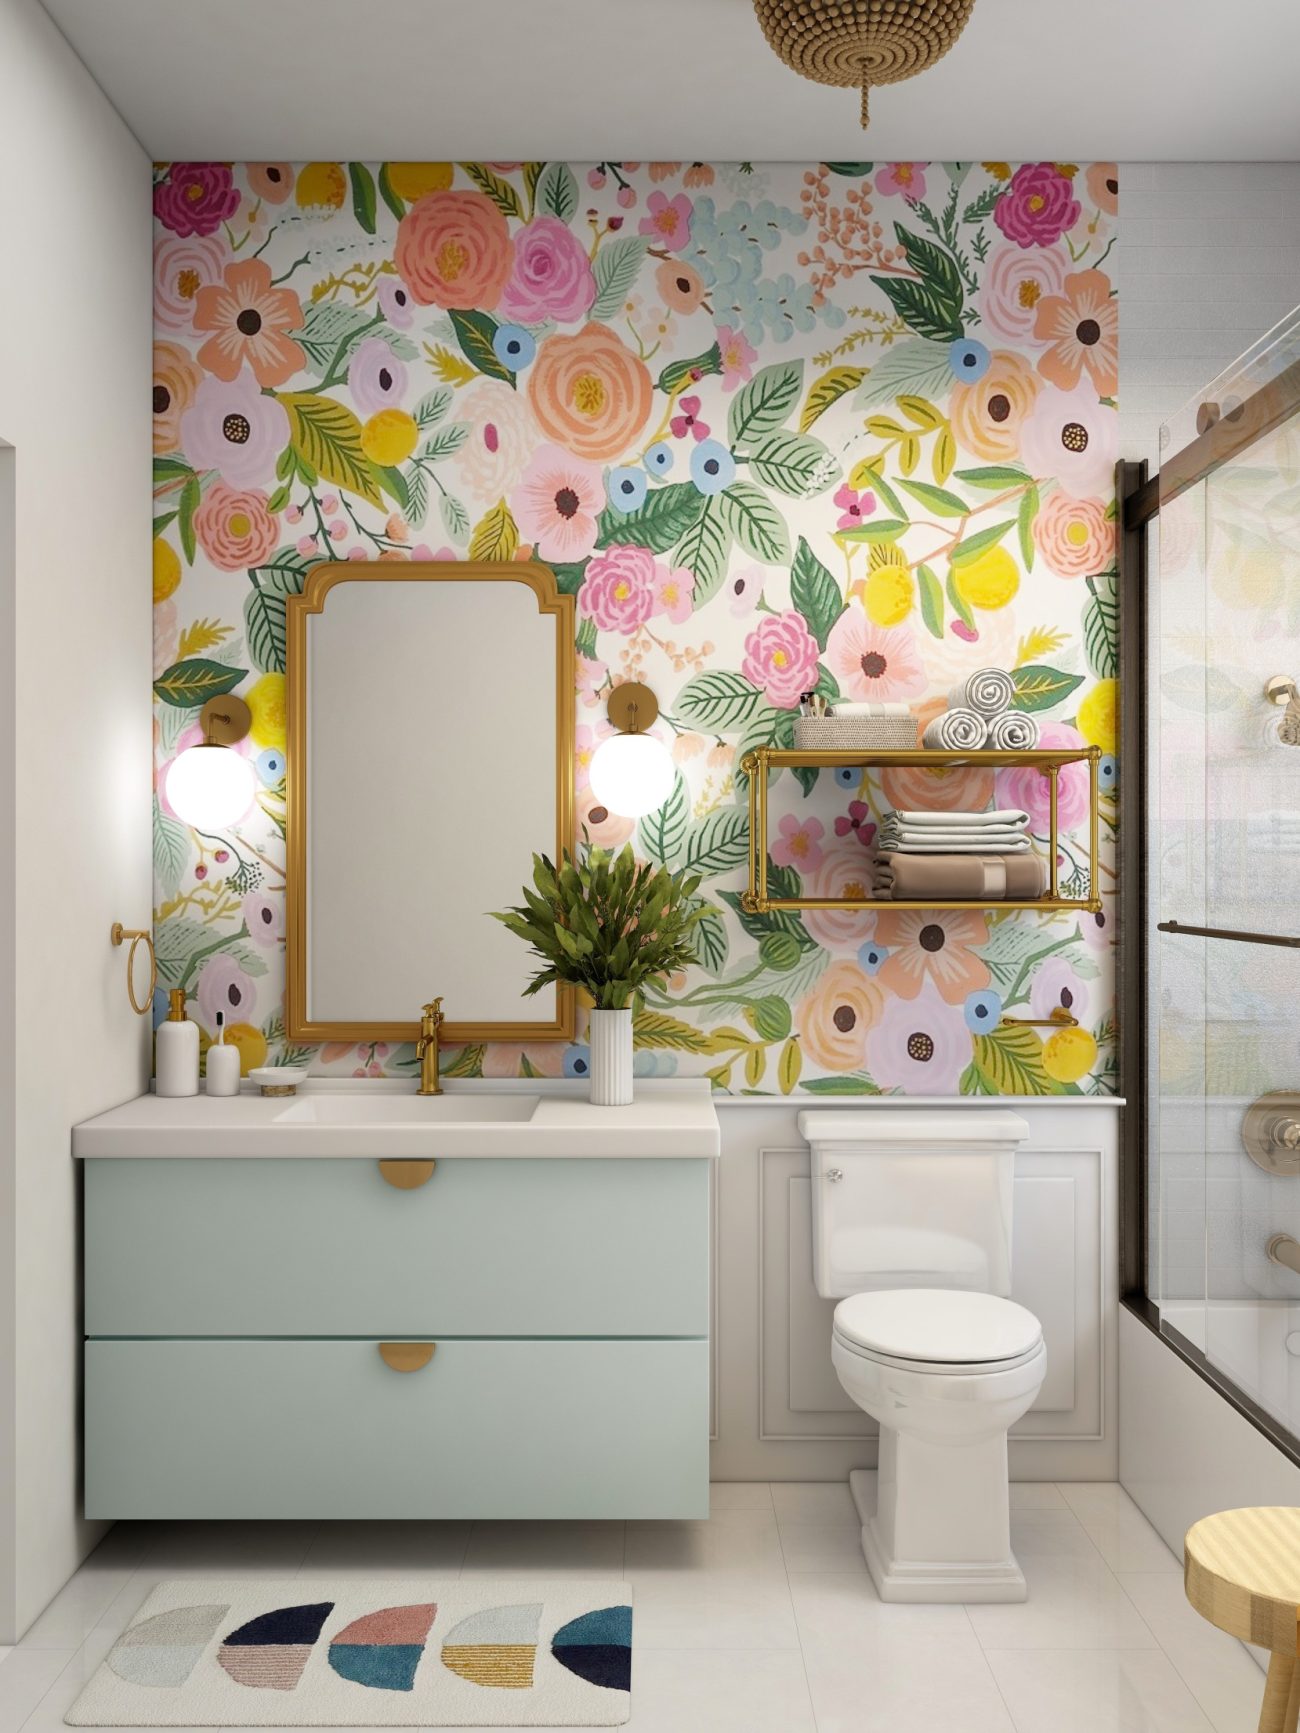 Bathroom with floral wallpaper, light green vanity and rectangular gold mirror